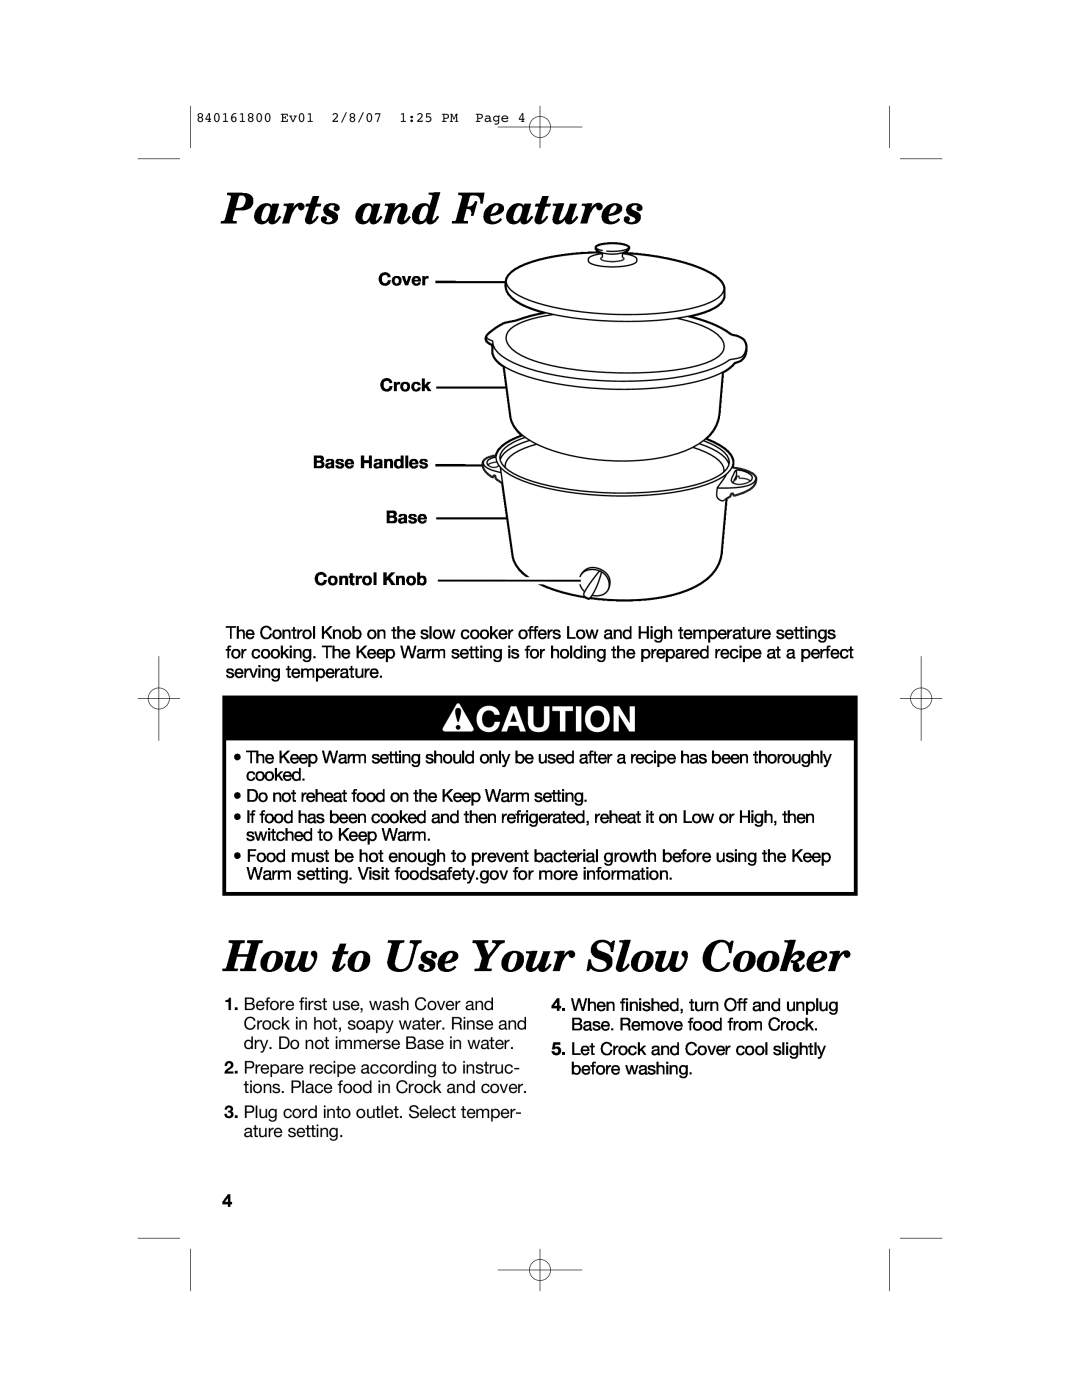 Hamilton Beach 840161800 manual Parts and Features, How to Use Your Slow Cooker, wCAUTION 